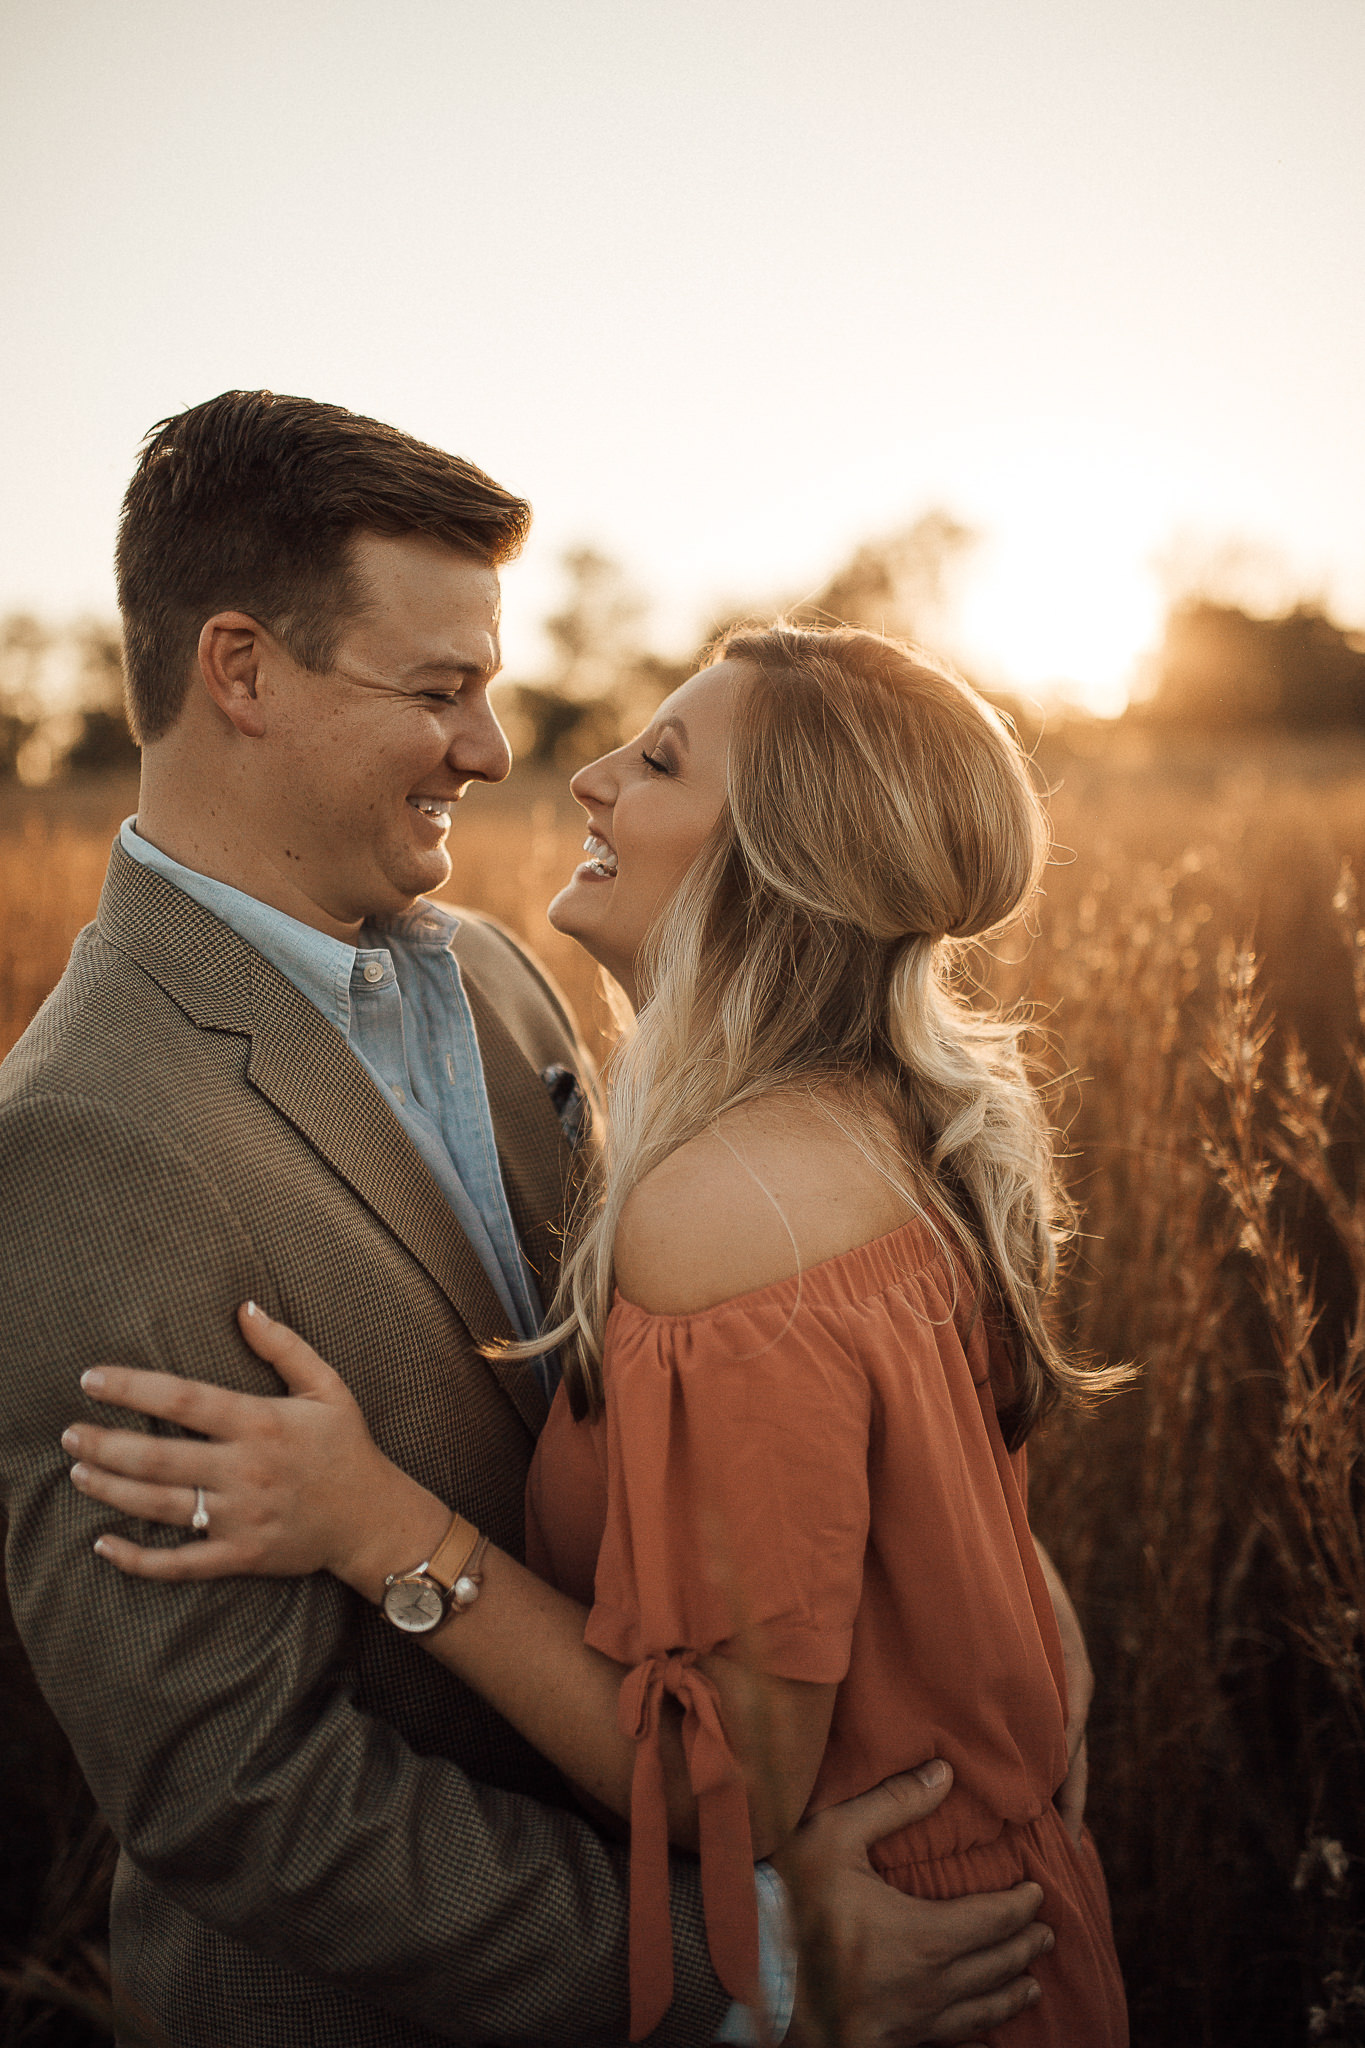 memphis-wedding-photographers-the-warmth-around-you-cassie-cook-photography-7.jpg